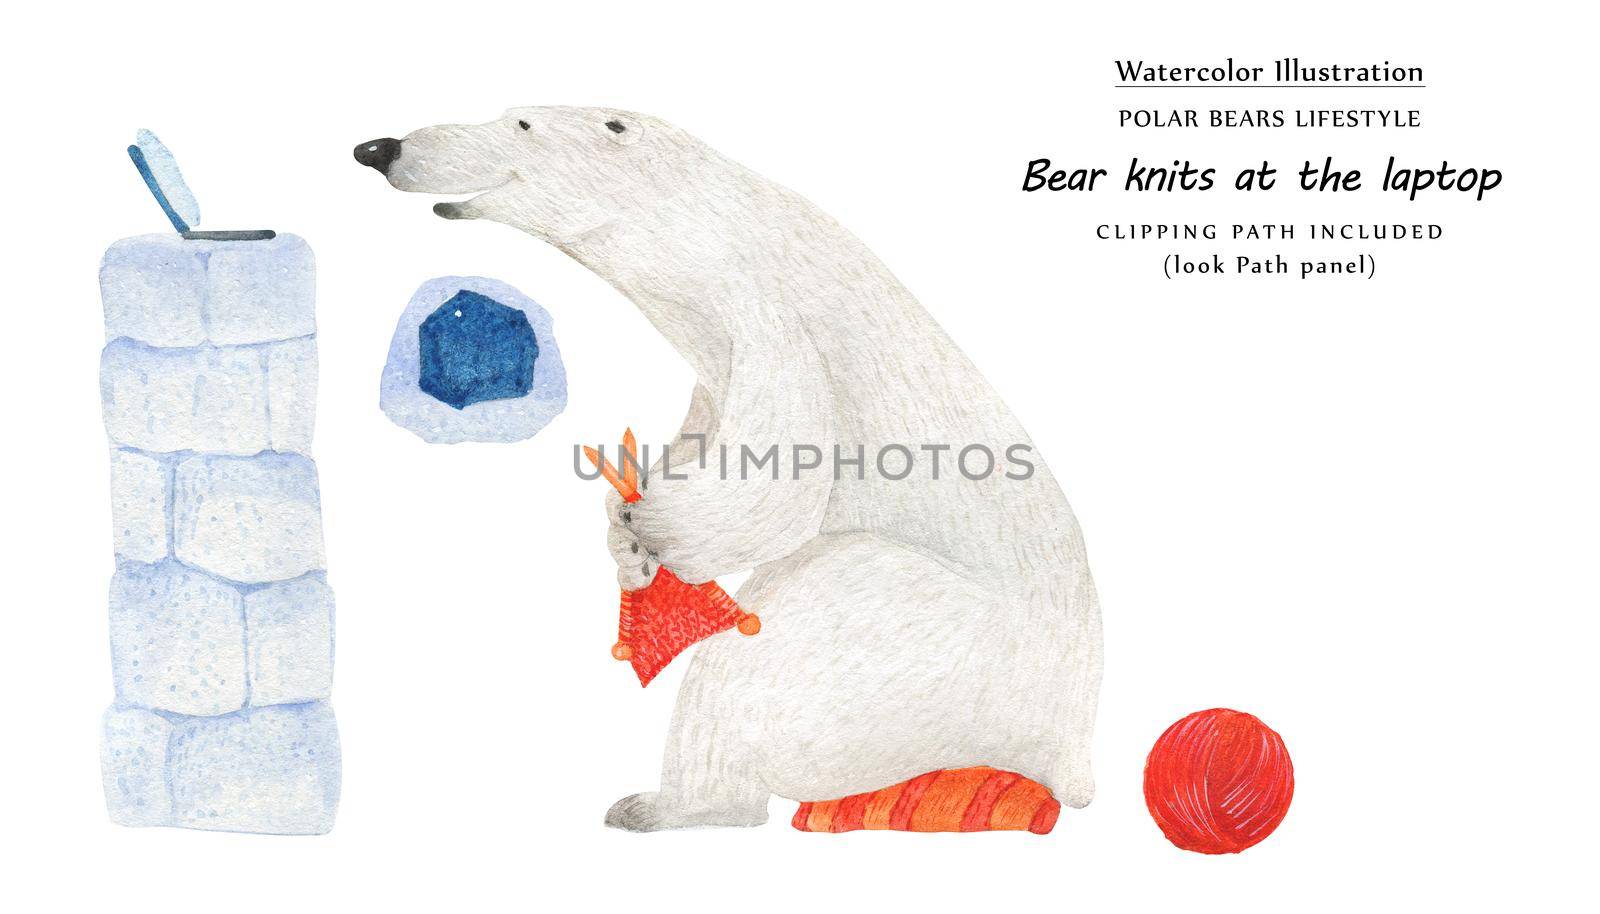 Bear knit at the laptop, close-up illustration by Xeniasnowstorm